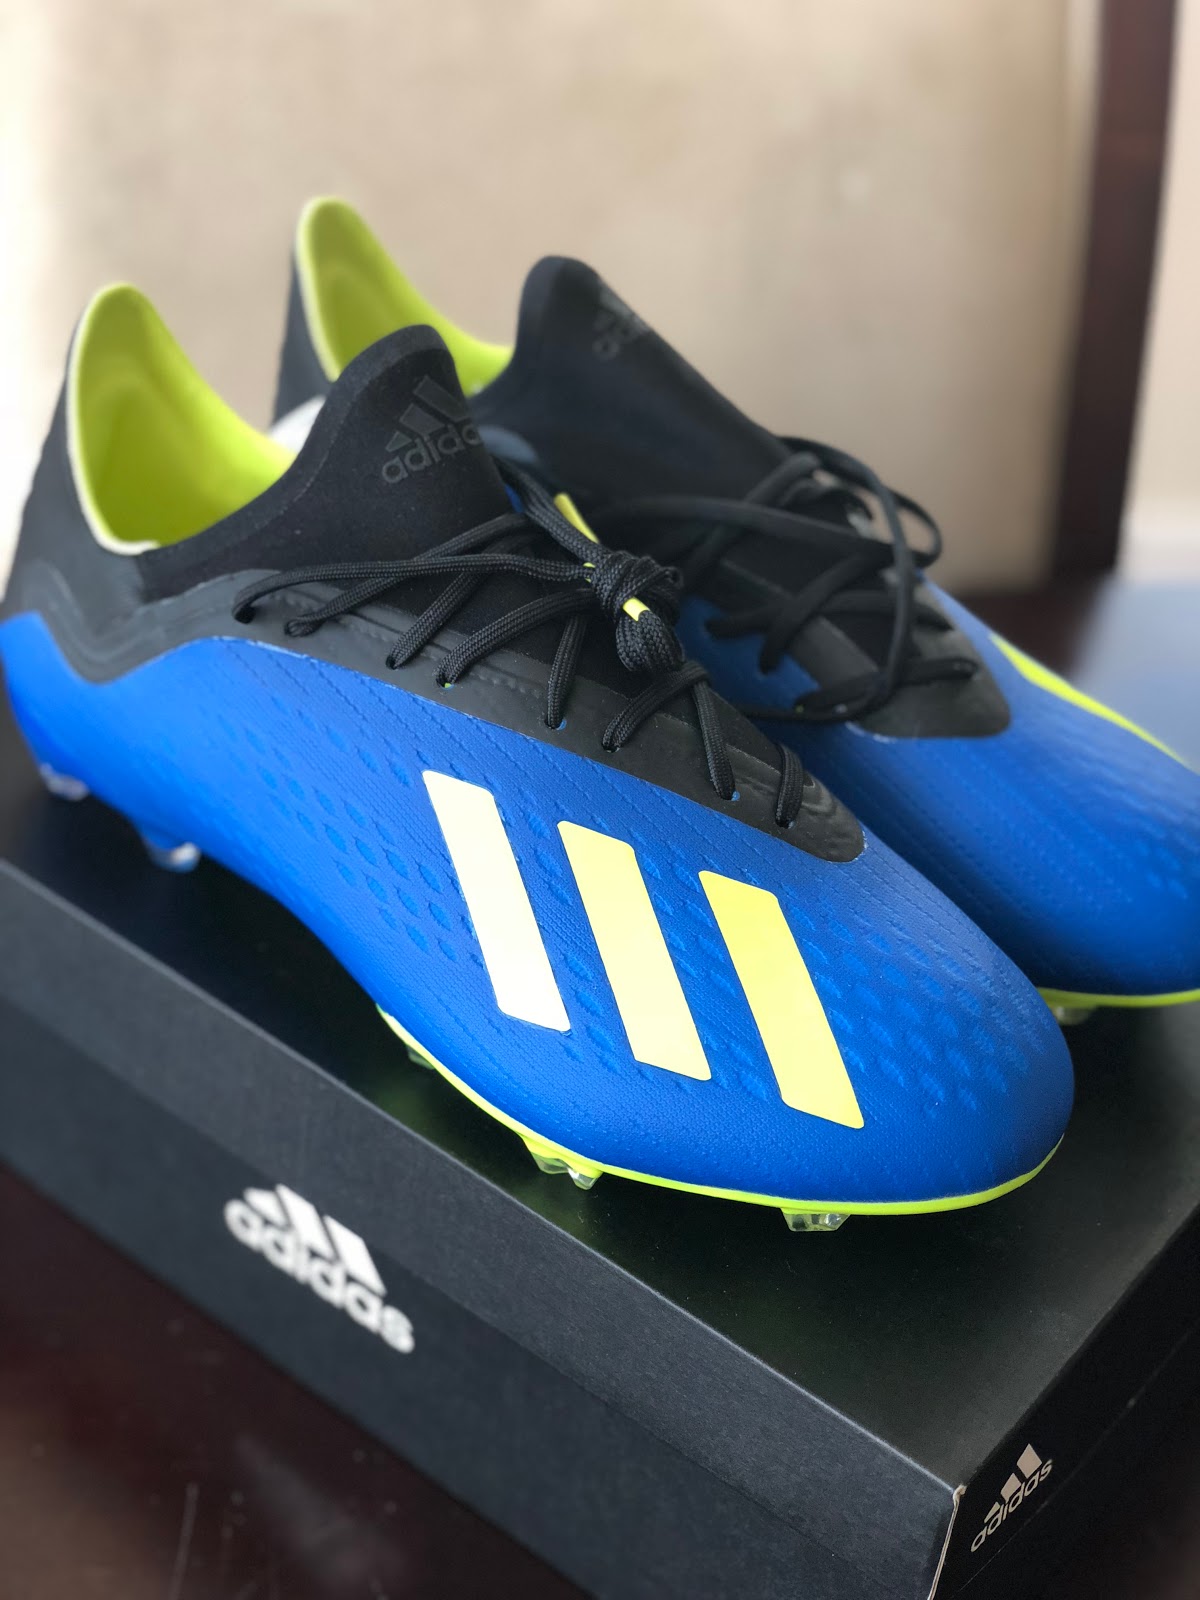 gunstig drinken ouder Confessions of a Sports Mama: Sports Mama Review: Adidas X 18.2 FG Cleats